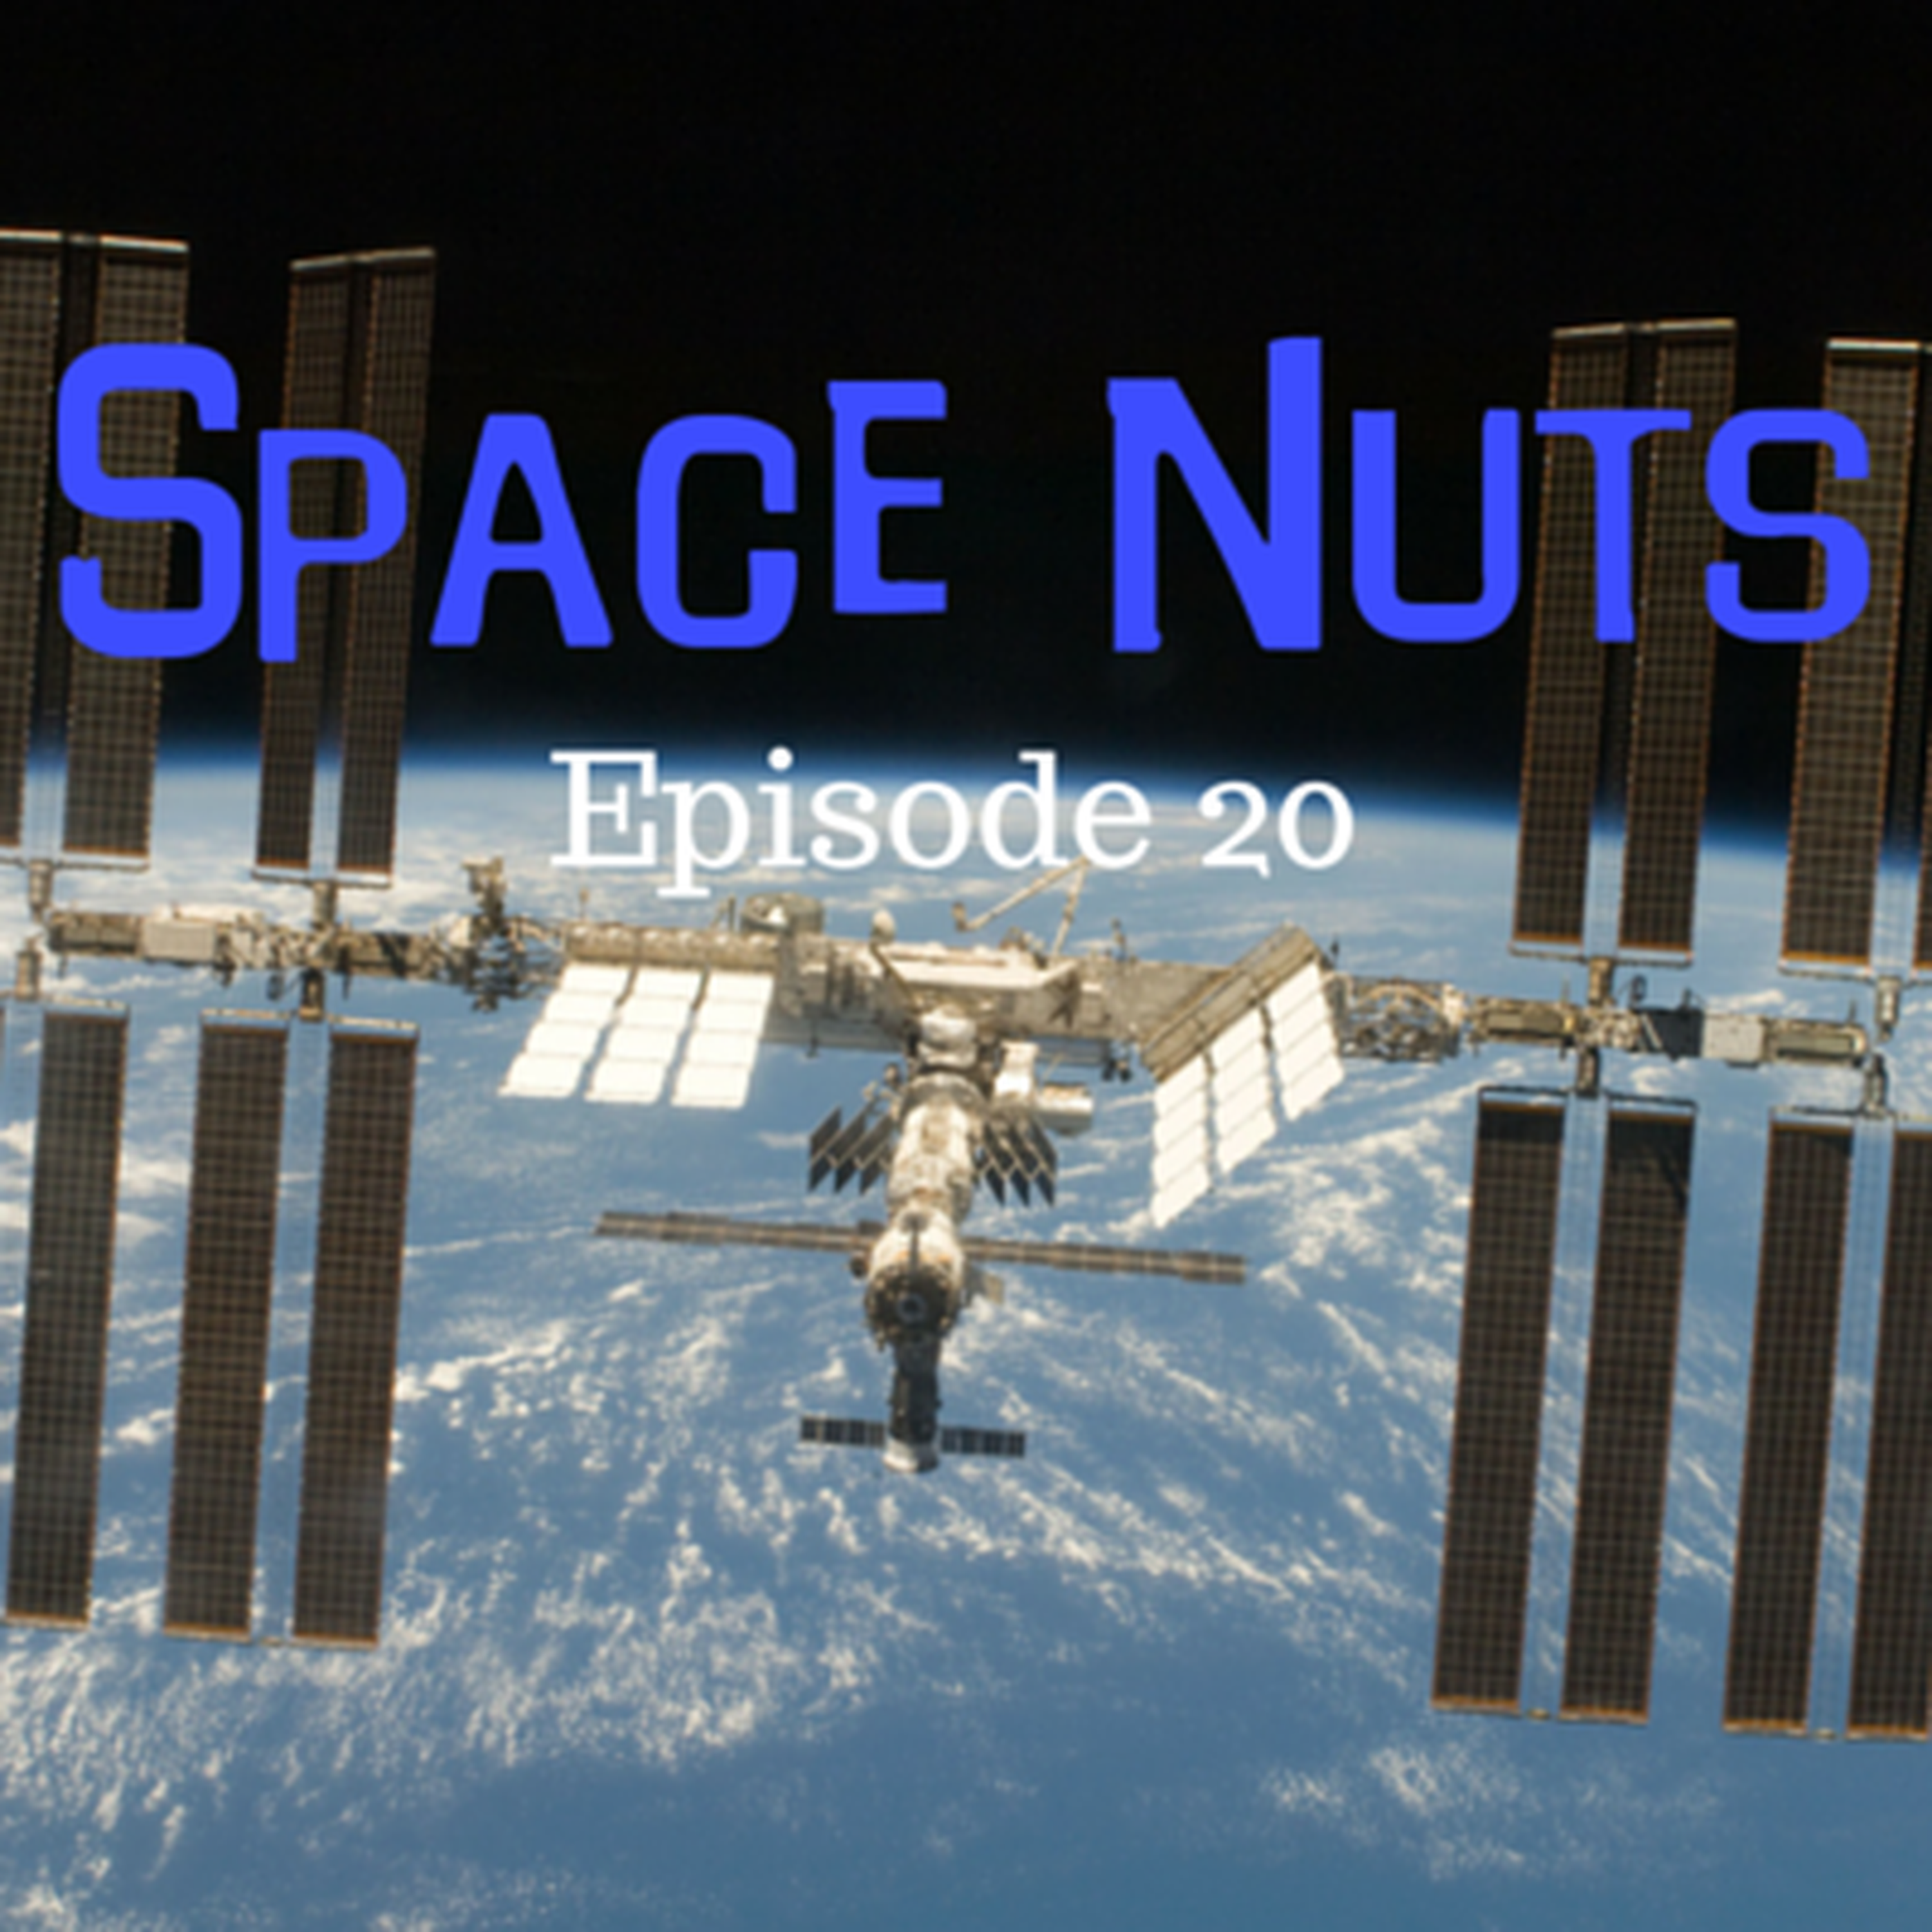 21: Space Nuts Episode 20 - Building blocks of life found on 67P